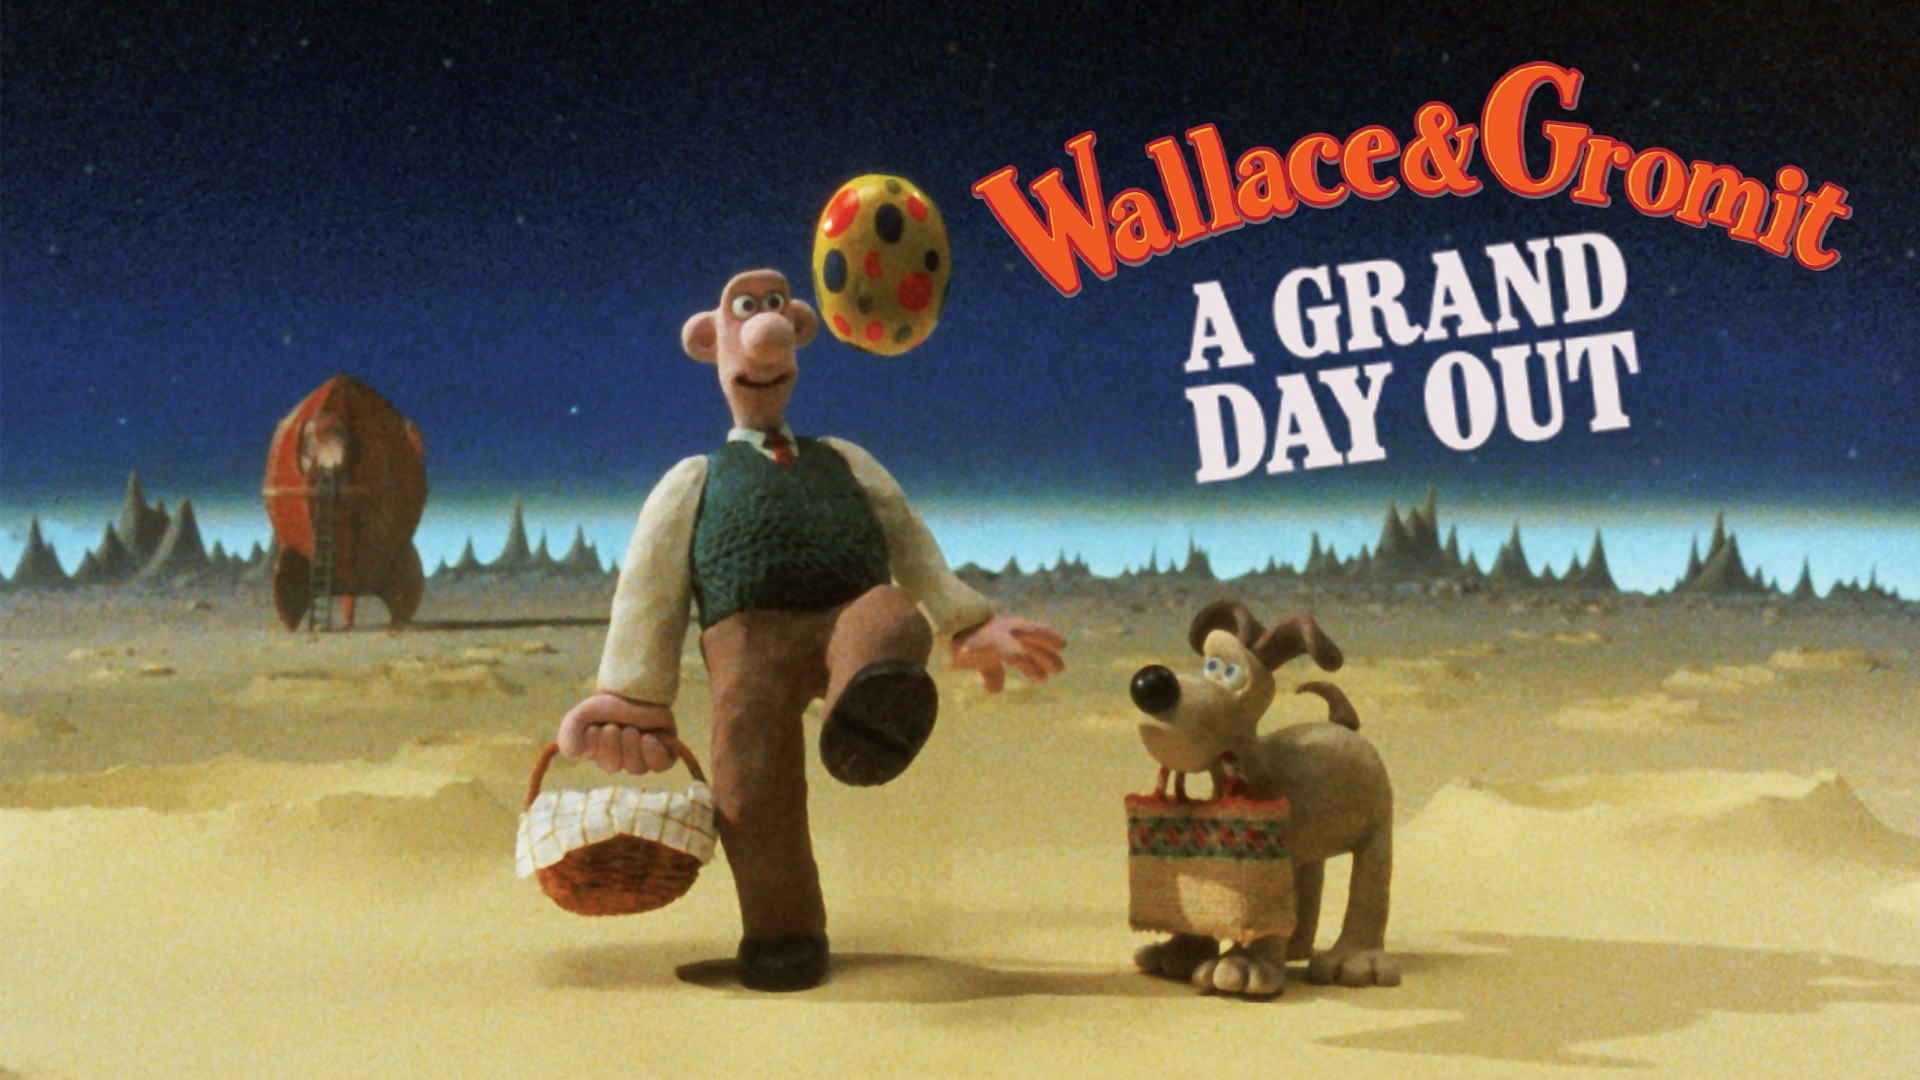 Wallace & Gromit, A Grand Day Out, Online, Movies, 1920x1080 Full HD Desktop